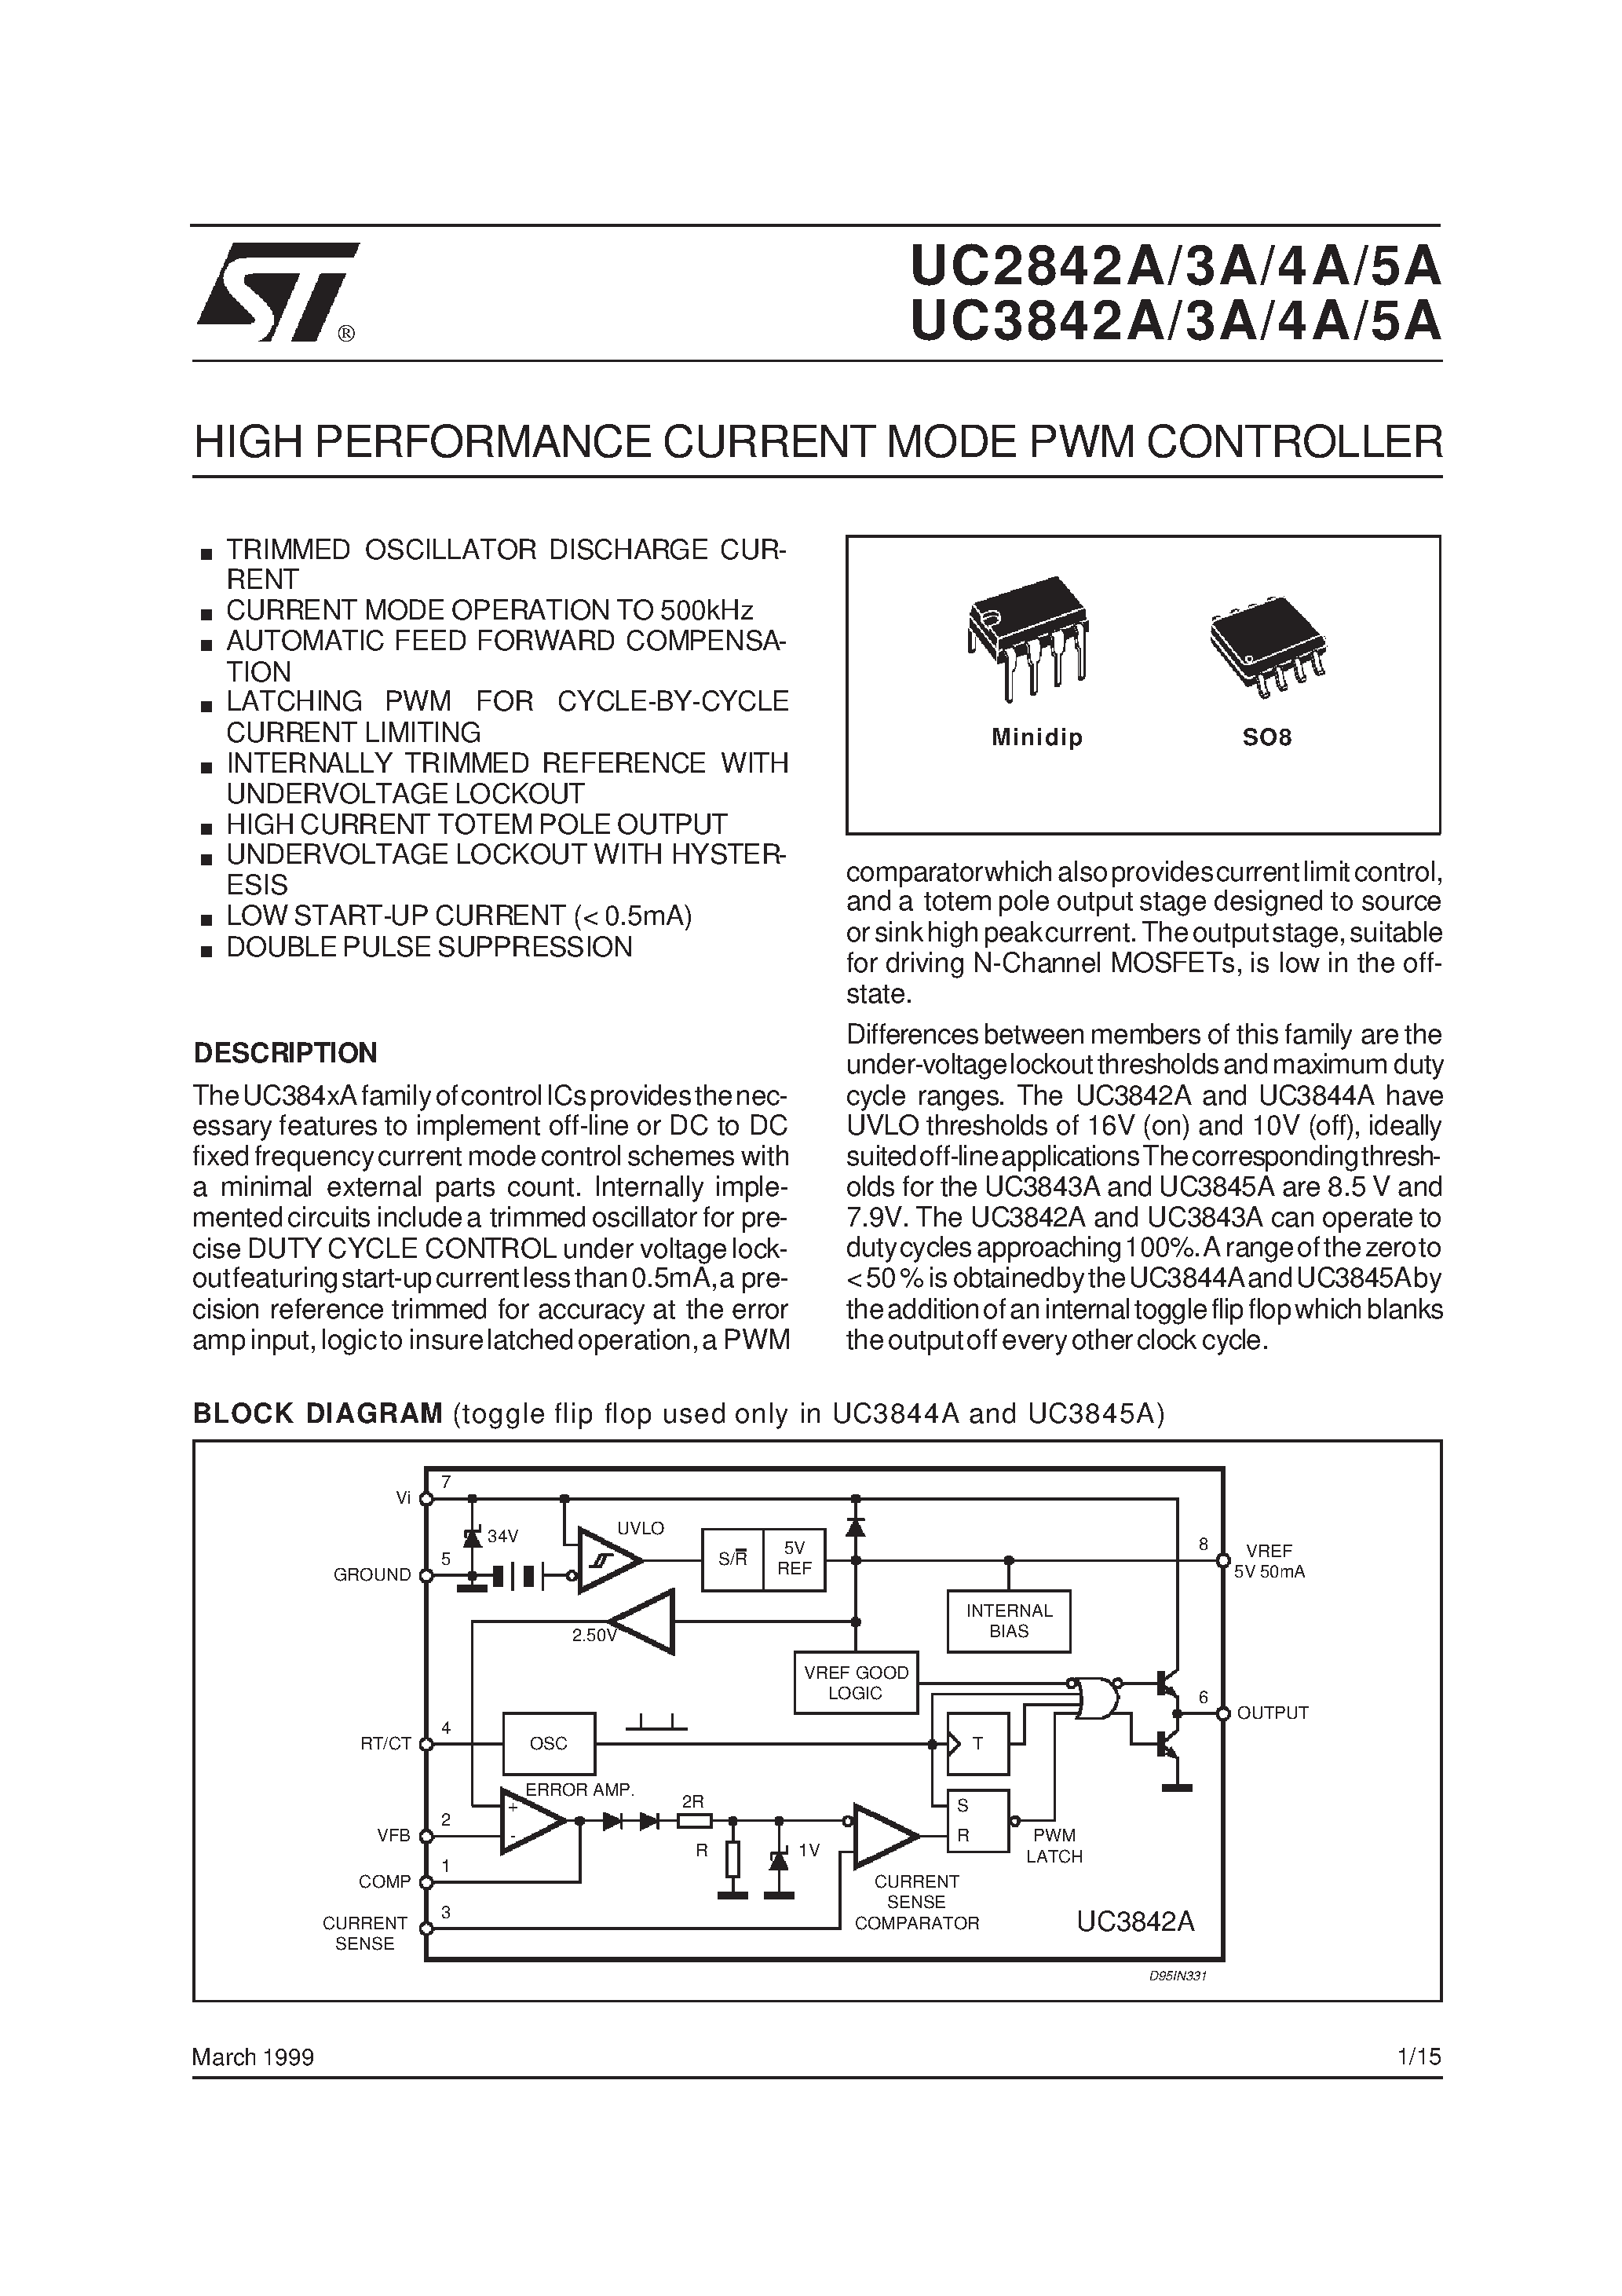 Datasheet UC2842A - (UC2842A - UC2845A) HIGH PERFORMANCE CURRENT MODE PWM CONTROLLER page 1